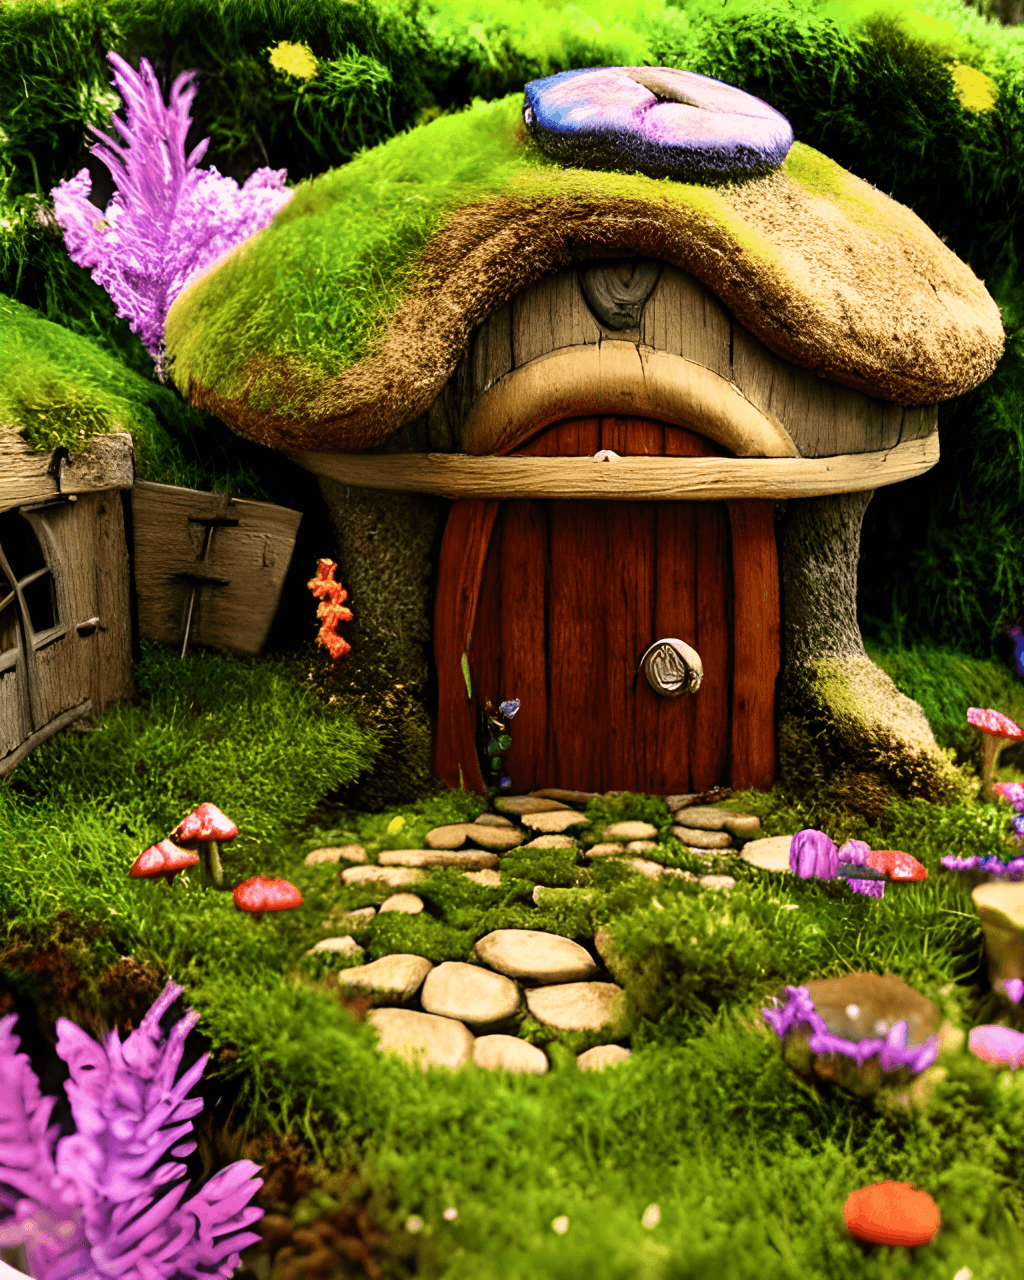 Toadstool Hobbit House in an Enchanted Forest · Creative Fabrica